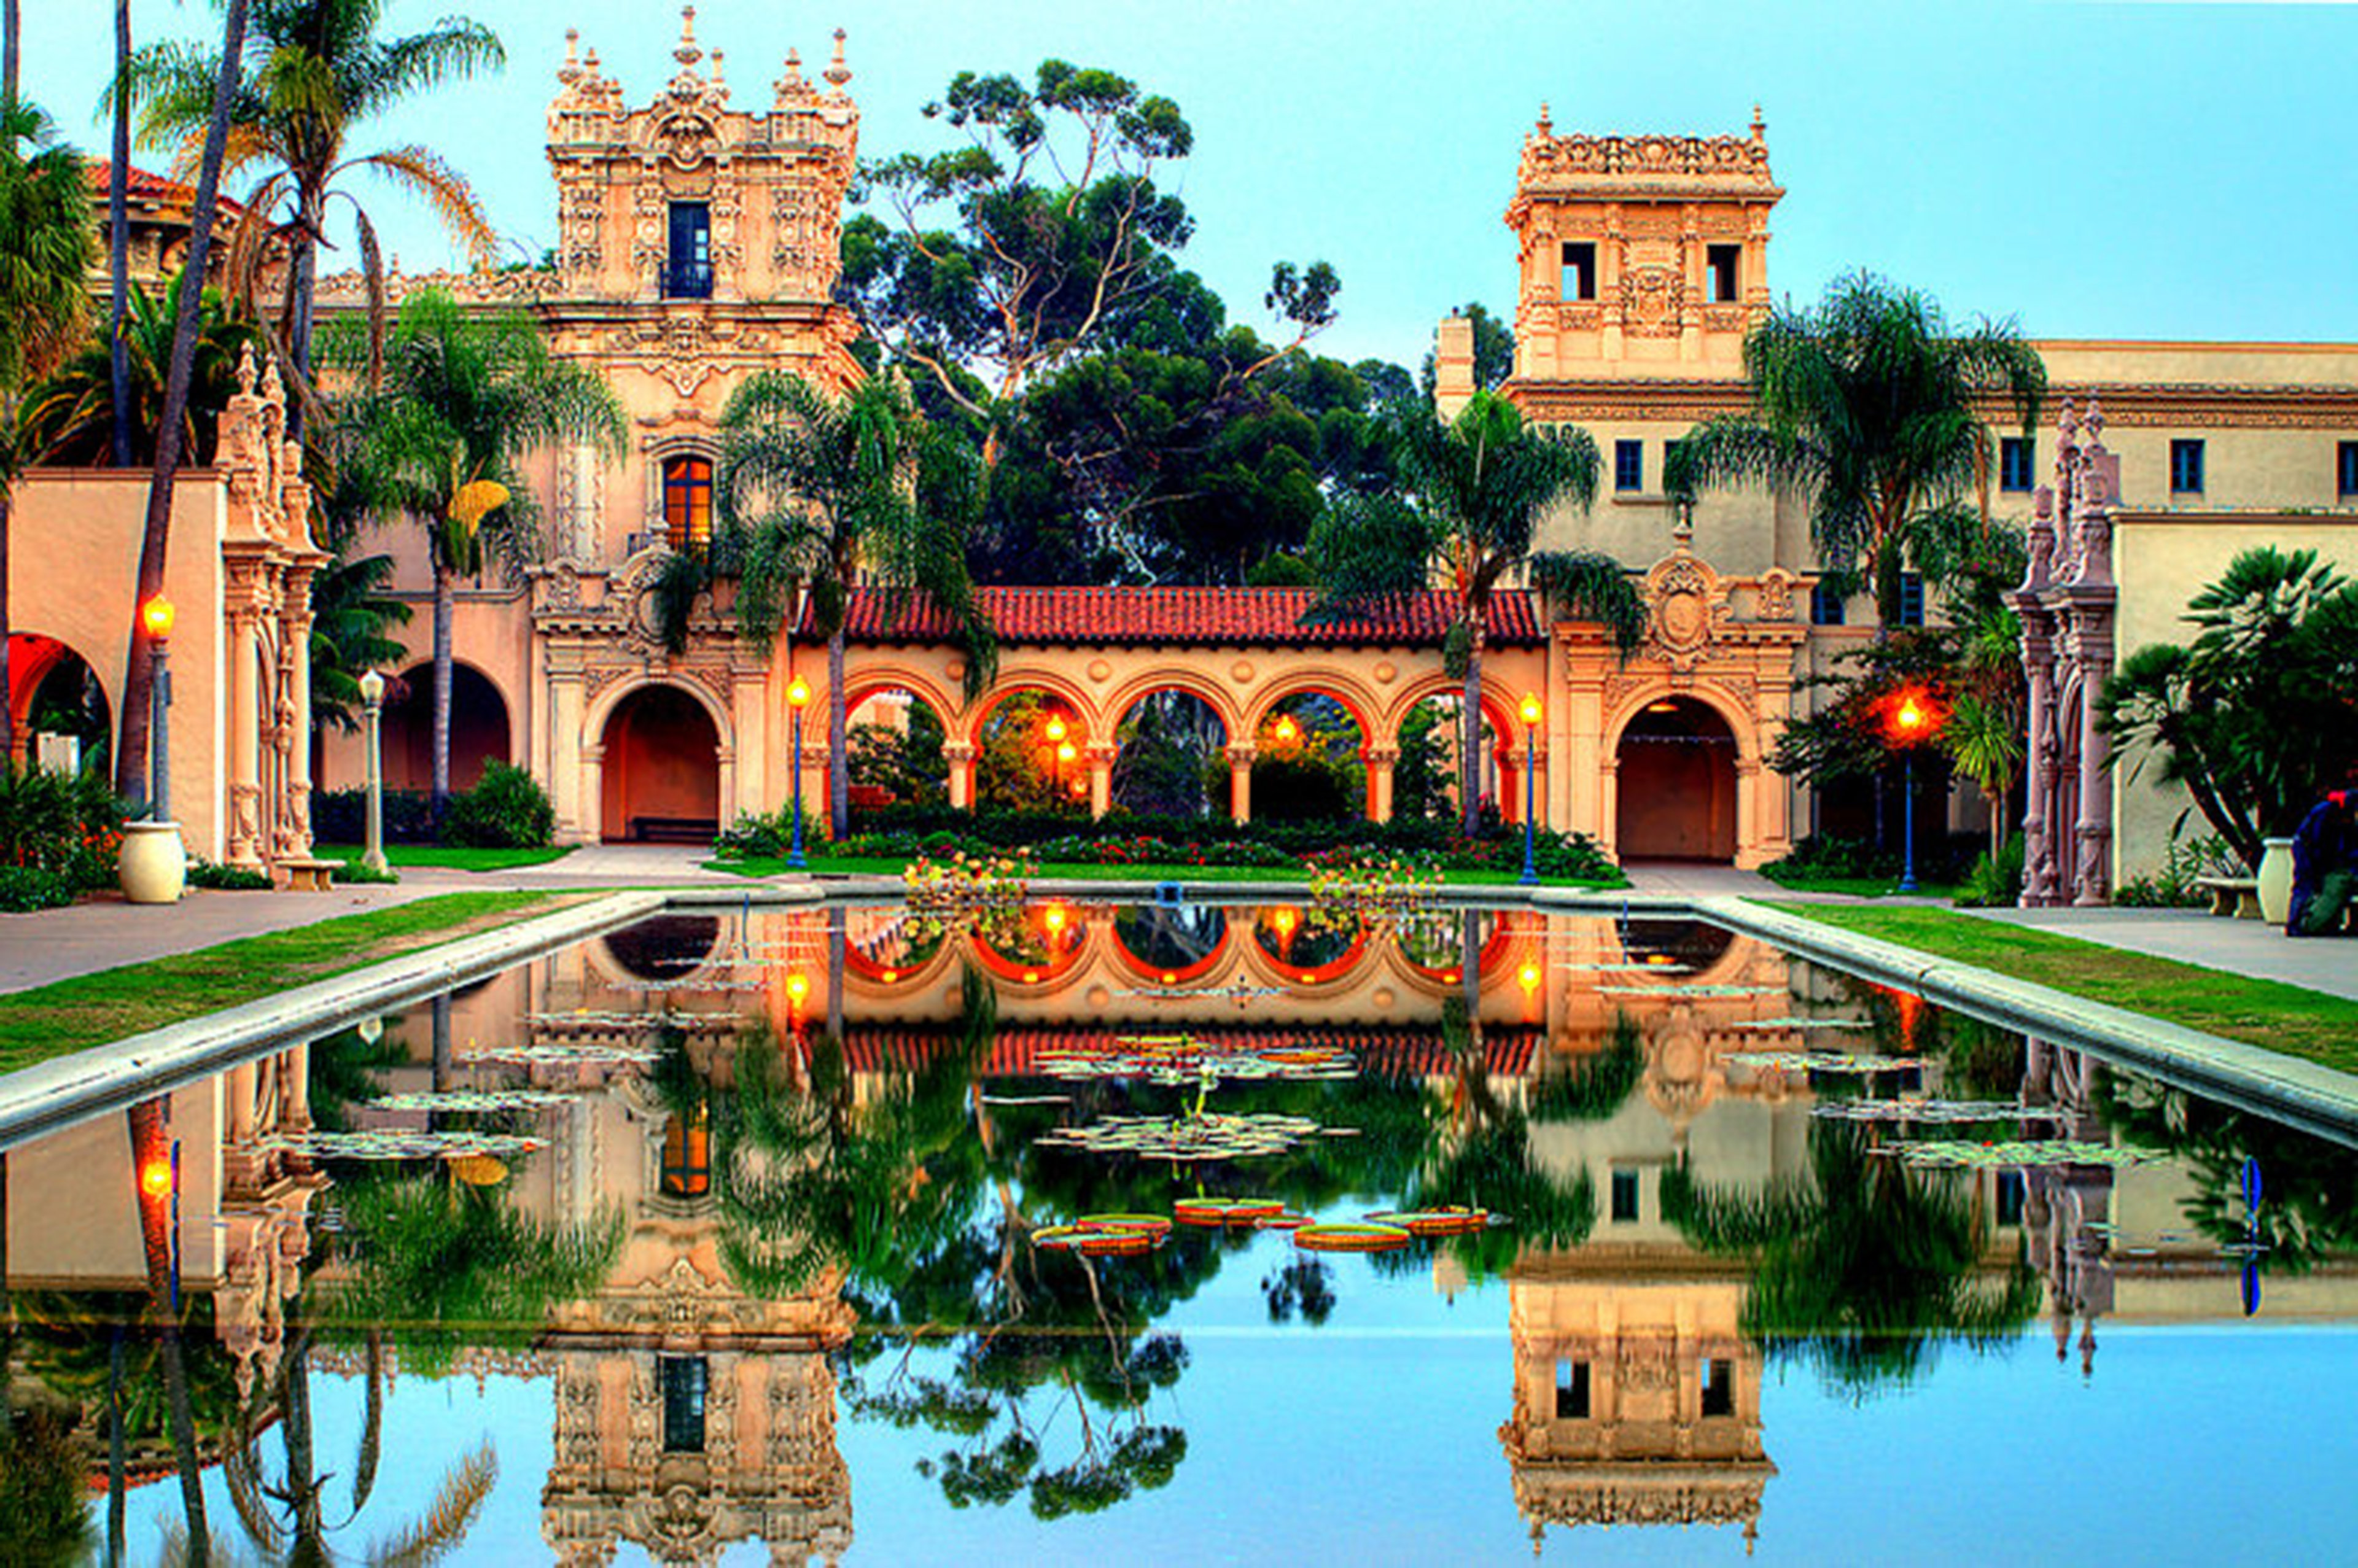 Experience the wonders that Historic Balboa Park has to offer.